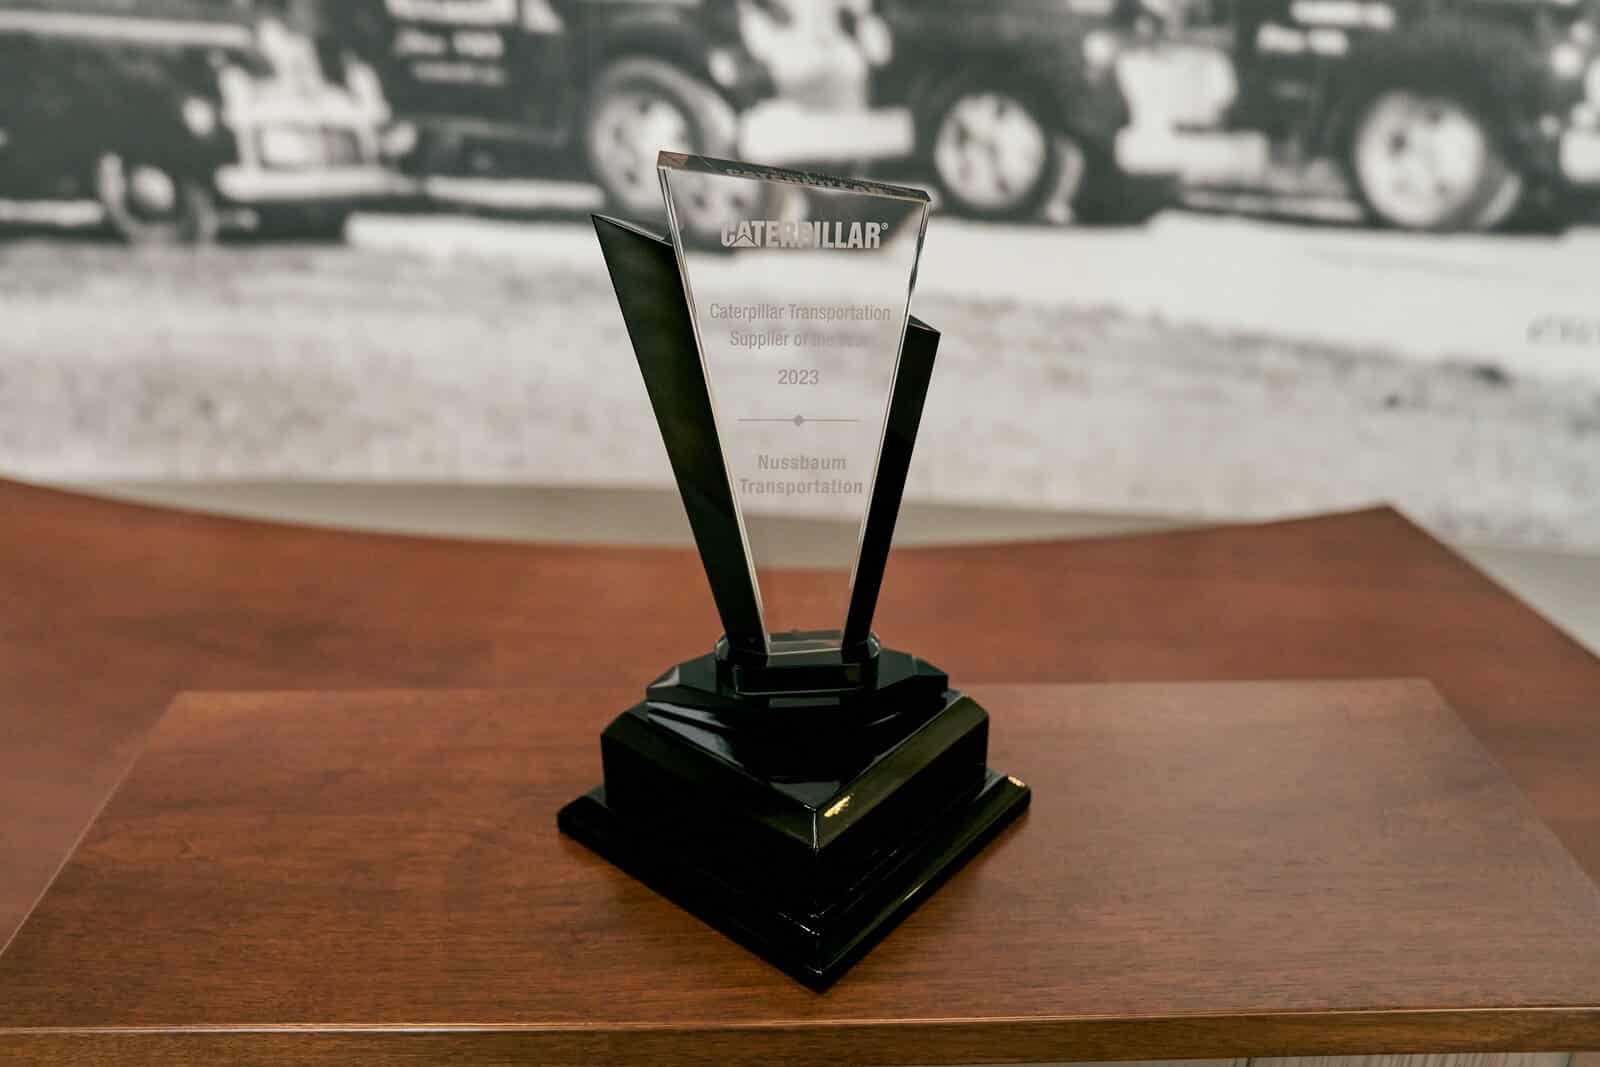 Nussbaum Named the 2023 Transportation Supplier of the Year by Caterpillar Inc.